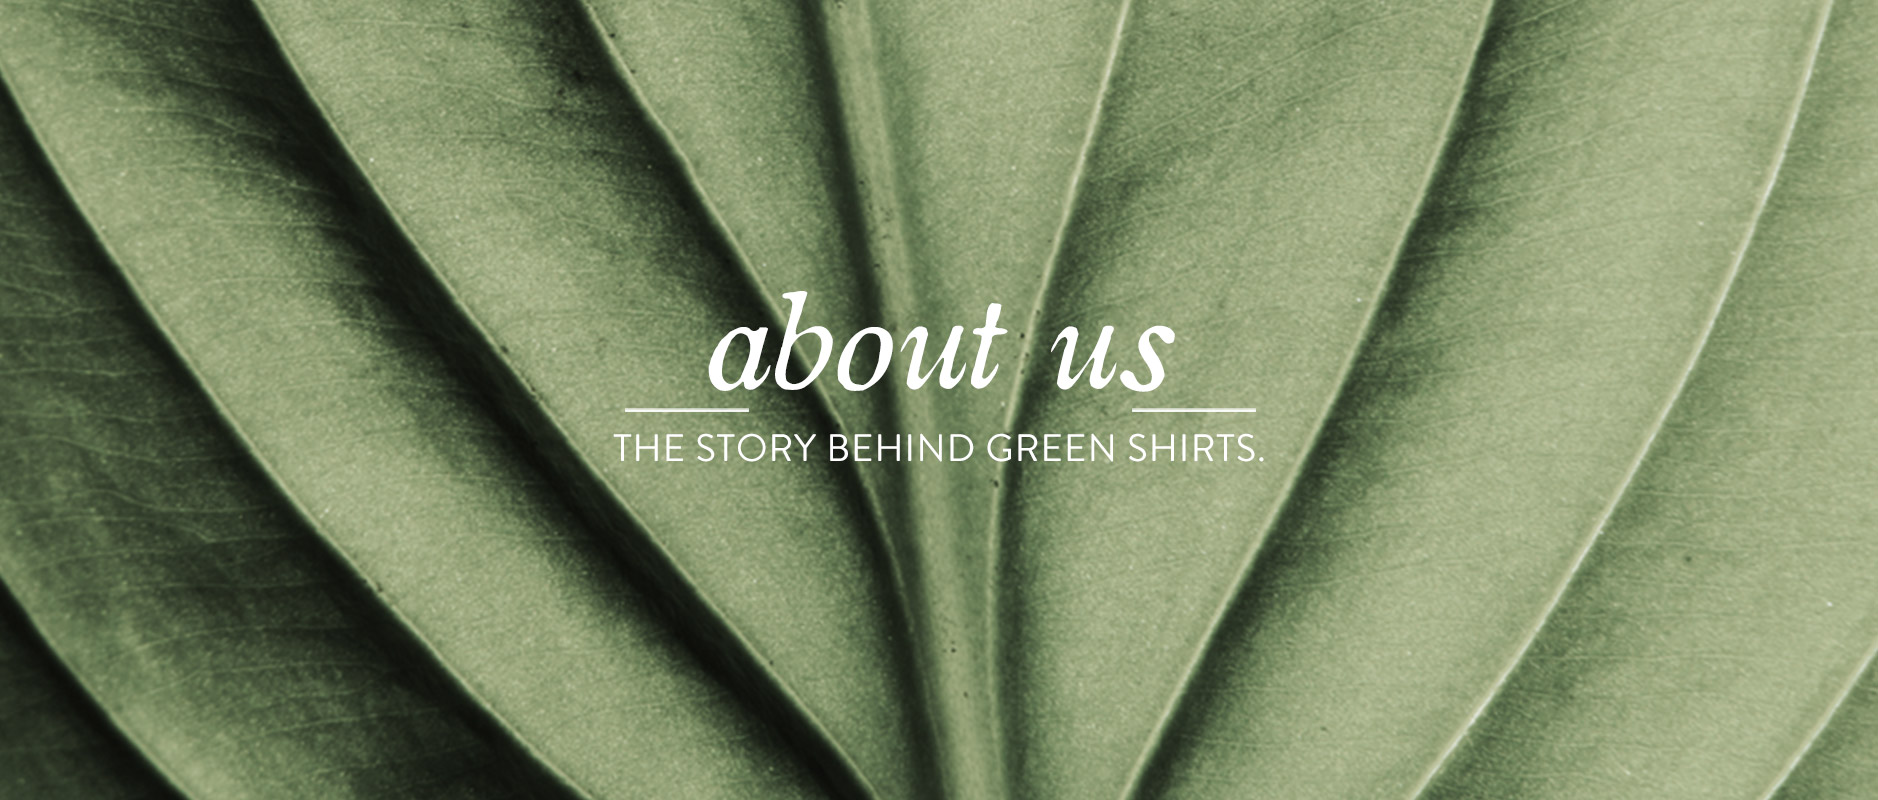 the-story-behind-green-shirts-about-us